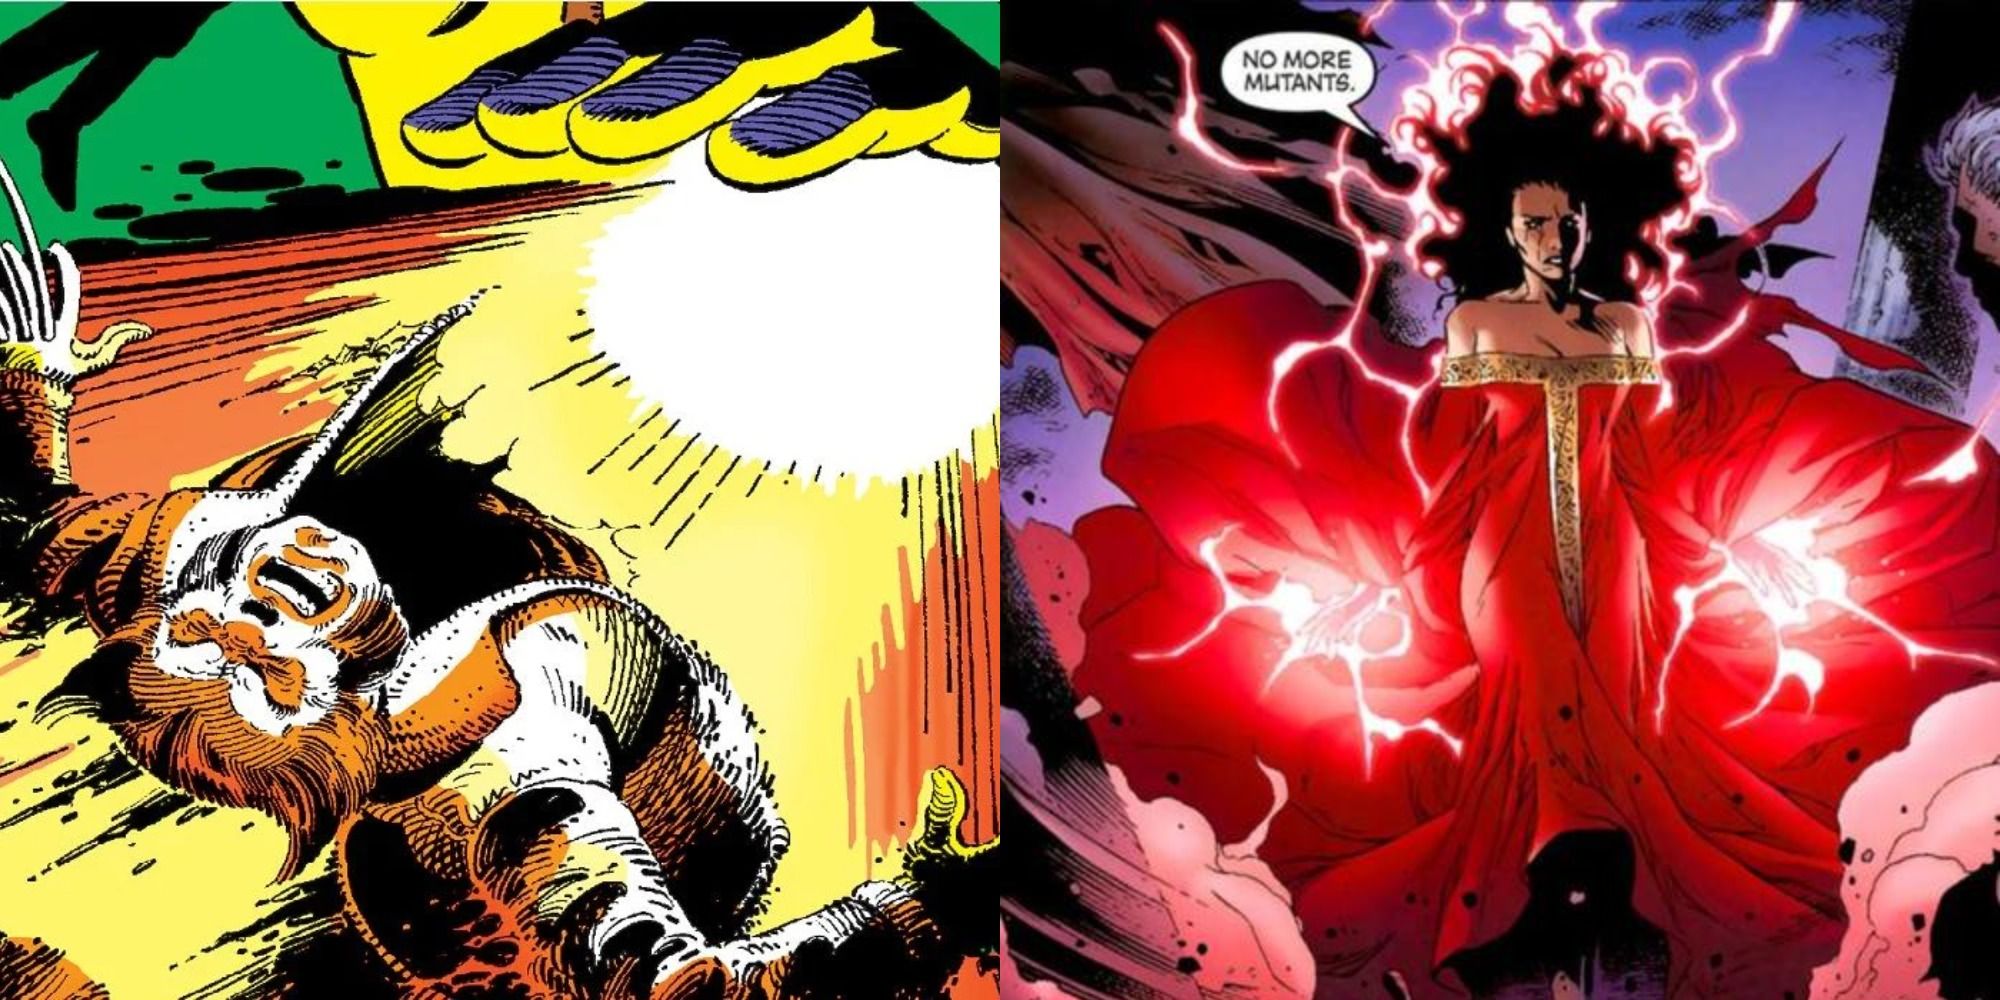 Split image of Wolverine dying in Days of Future Past and Wanda saying no more mutants in House of M.